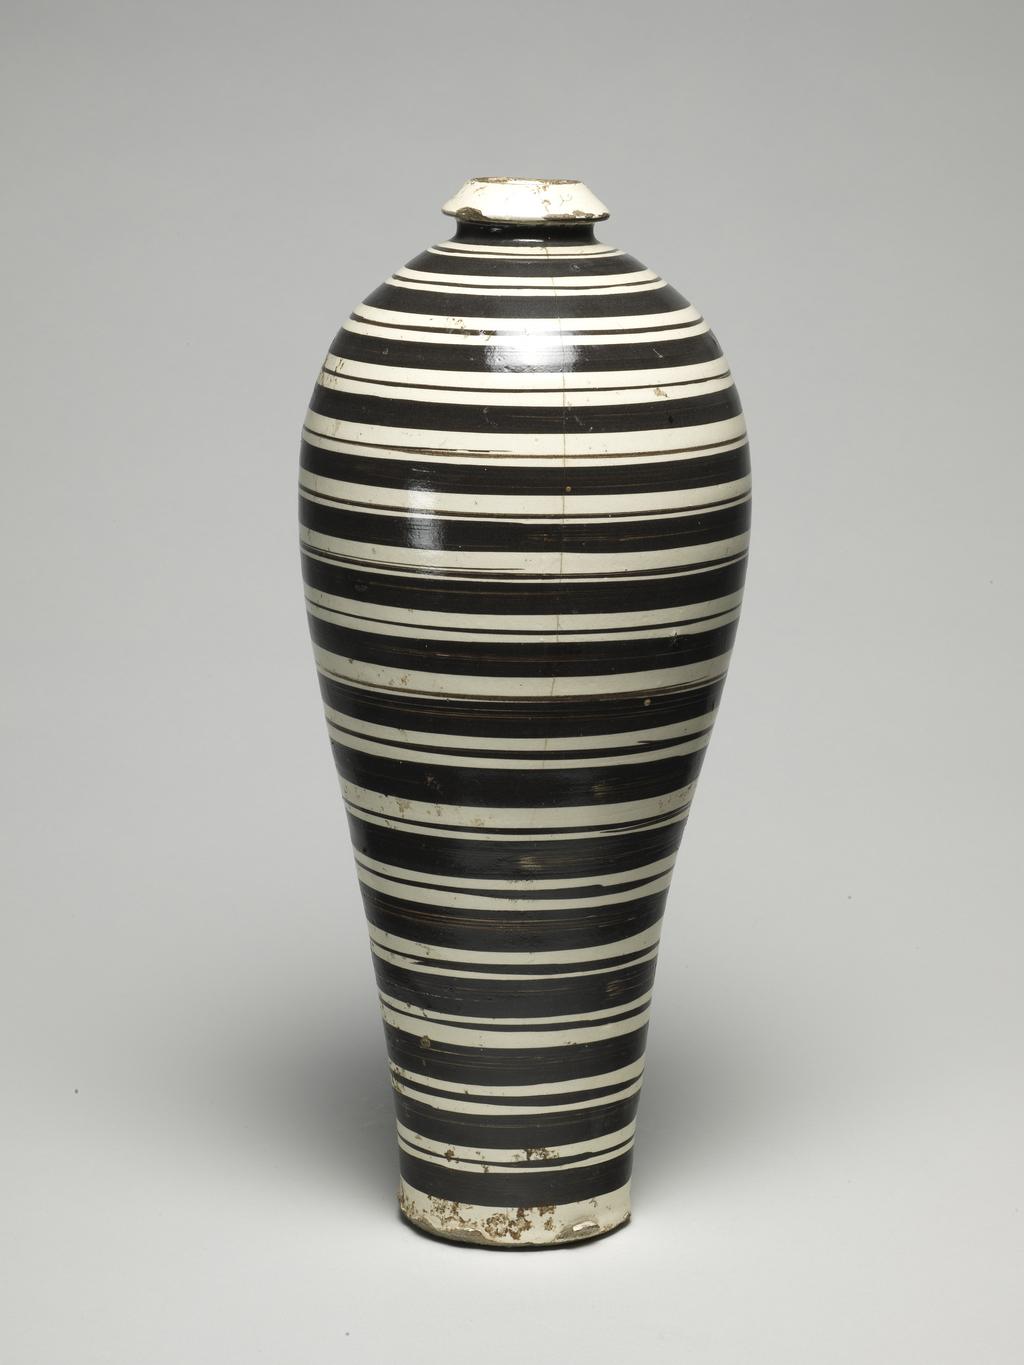 An image of Vase (mei ping), with black circles. Tz'u chou ware. Stoneware, height 35.5 cm. Song Dynasty (960-1279). Chinese.